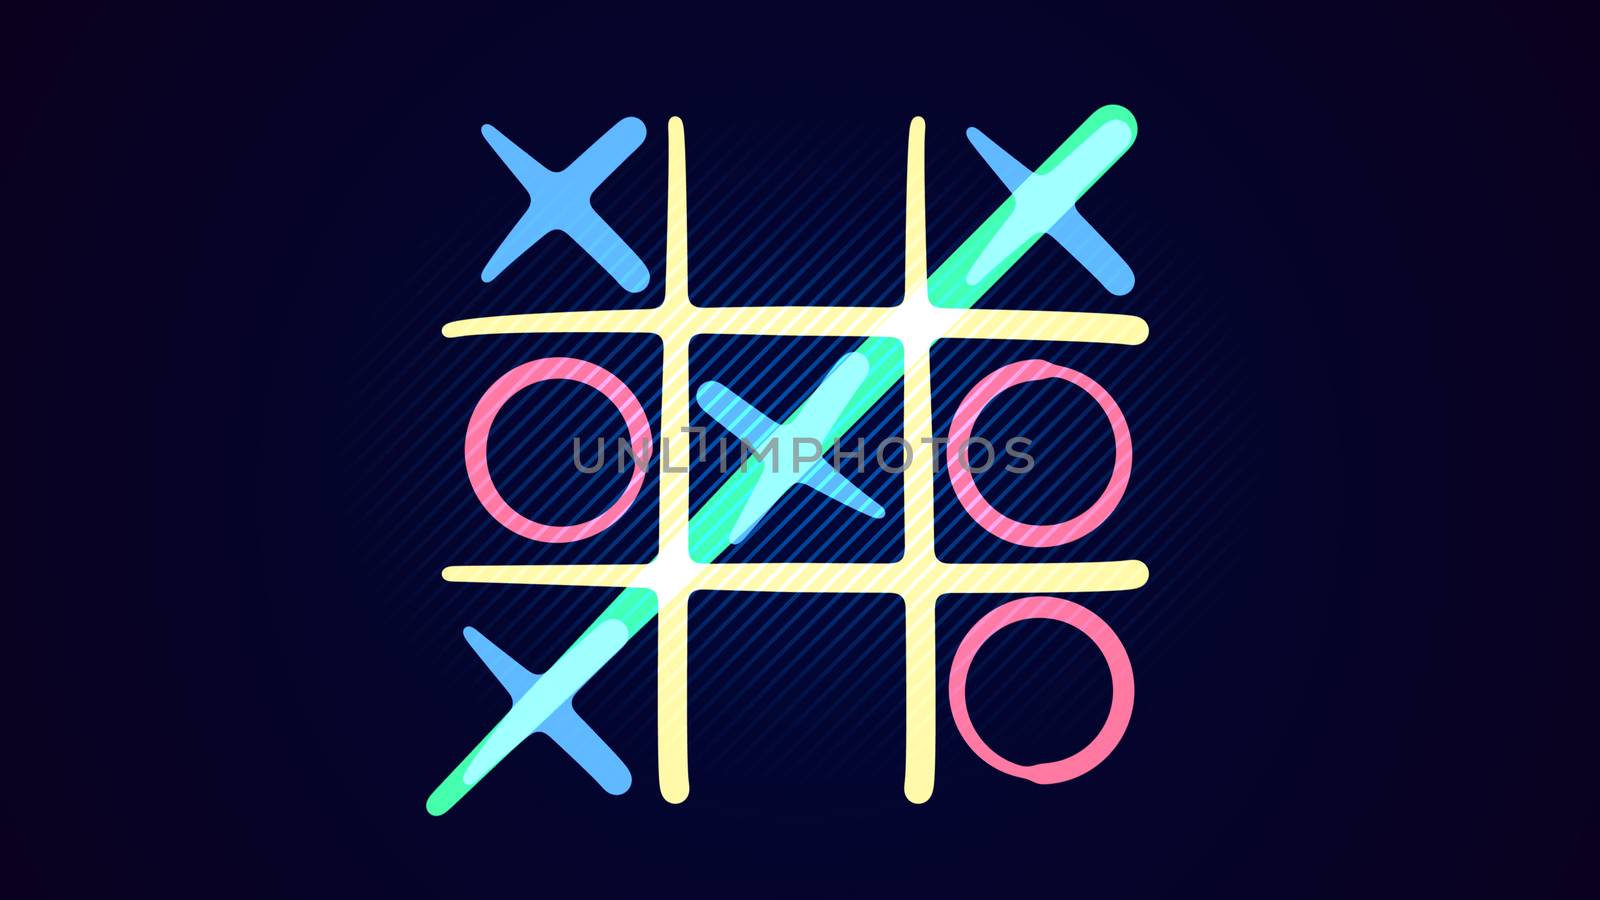 Cheerful 3d illustration of a noughts and crosses play with a white grid, pink and celeste figures, a winning diagonal end and a line in the blue background. It looks funny ond interesting.